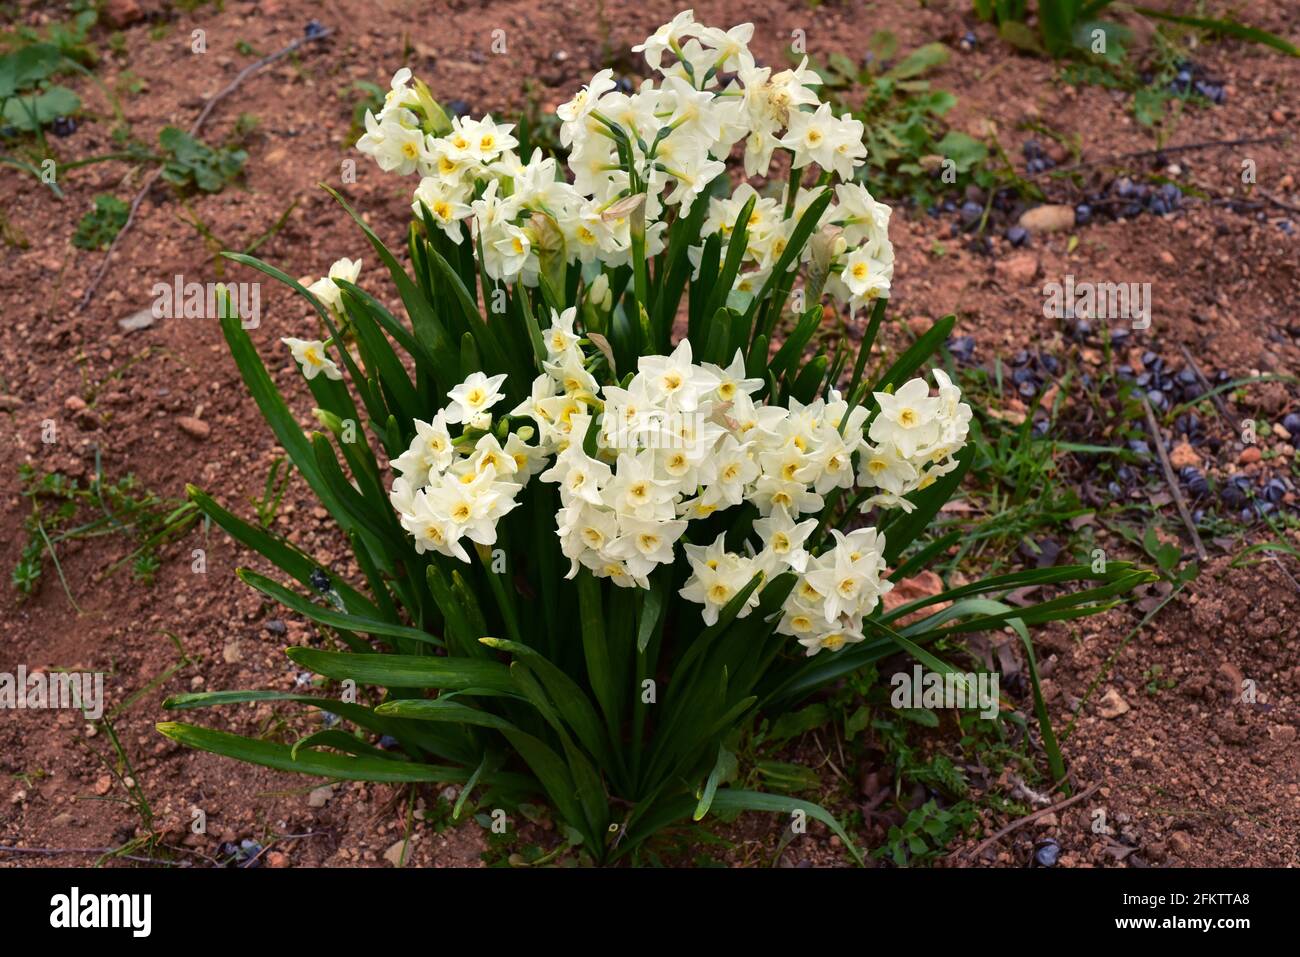 Paperwhite or bunch-flowered narcissus (Narcissus tazetta) is a bulbous perennial plant native to Mediterranean basin and part of Asia. Stock Photo